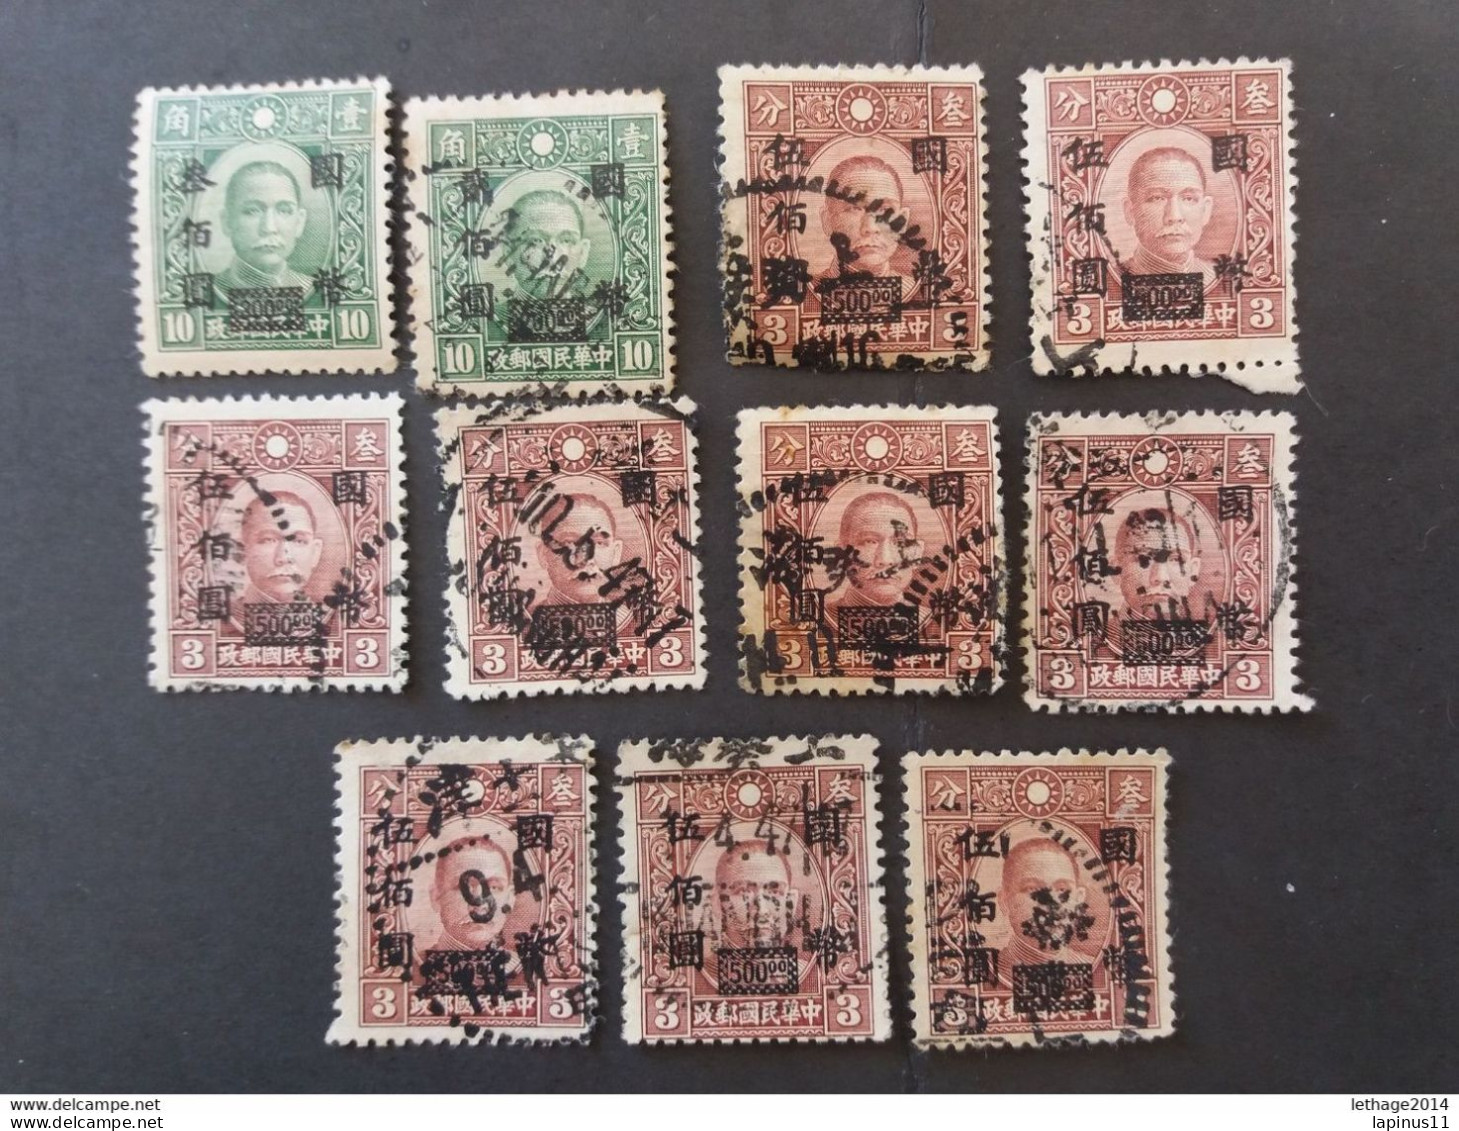 CHINE 中國 CHINA 1948 Martyrs Issue 1946 -1948 Previous Issued Stamps Surcharge - 1912-1949 Republic